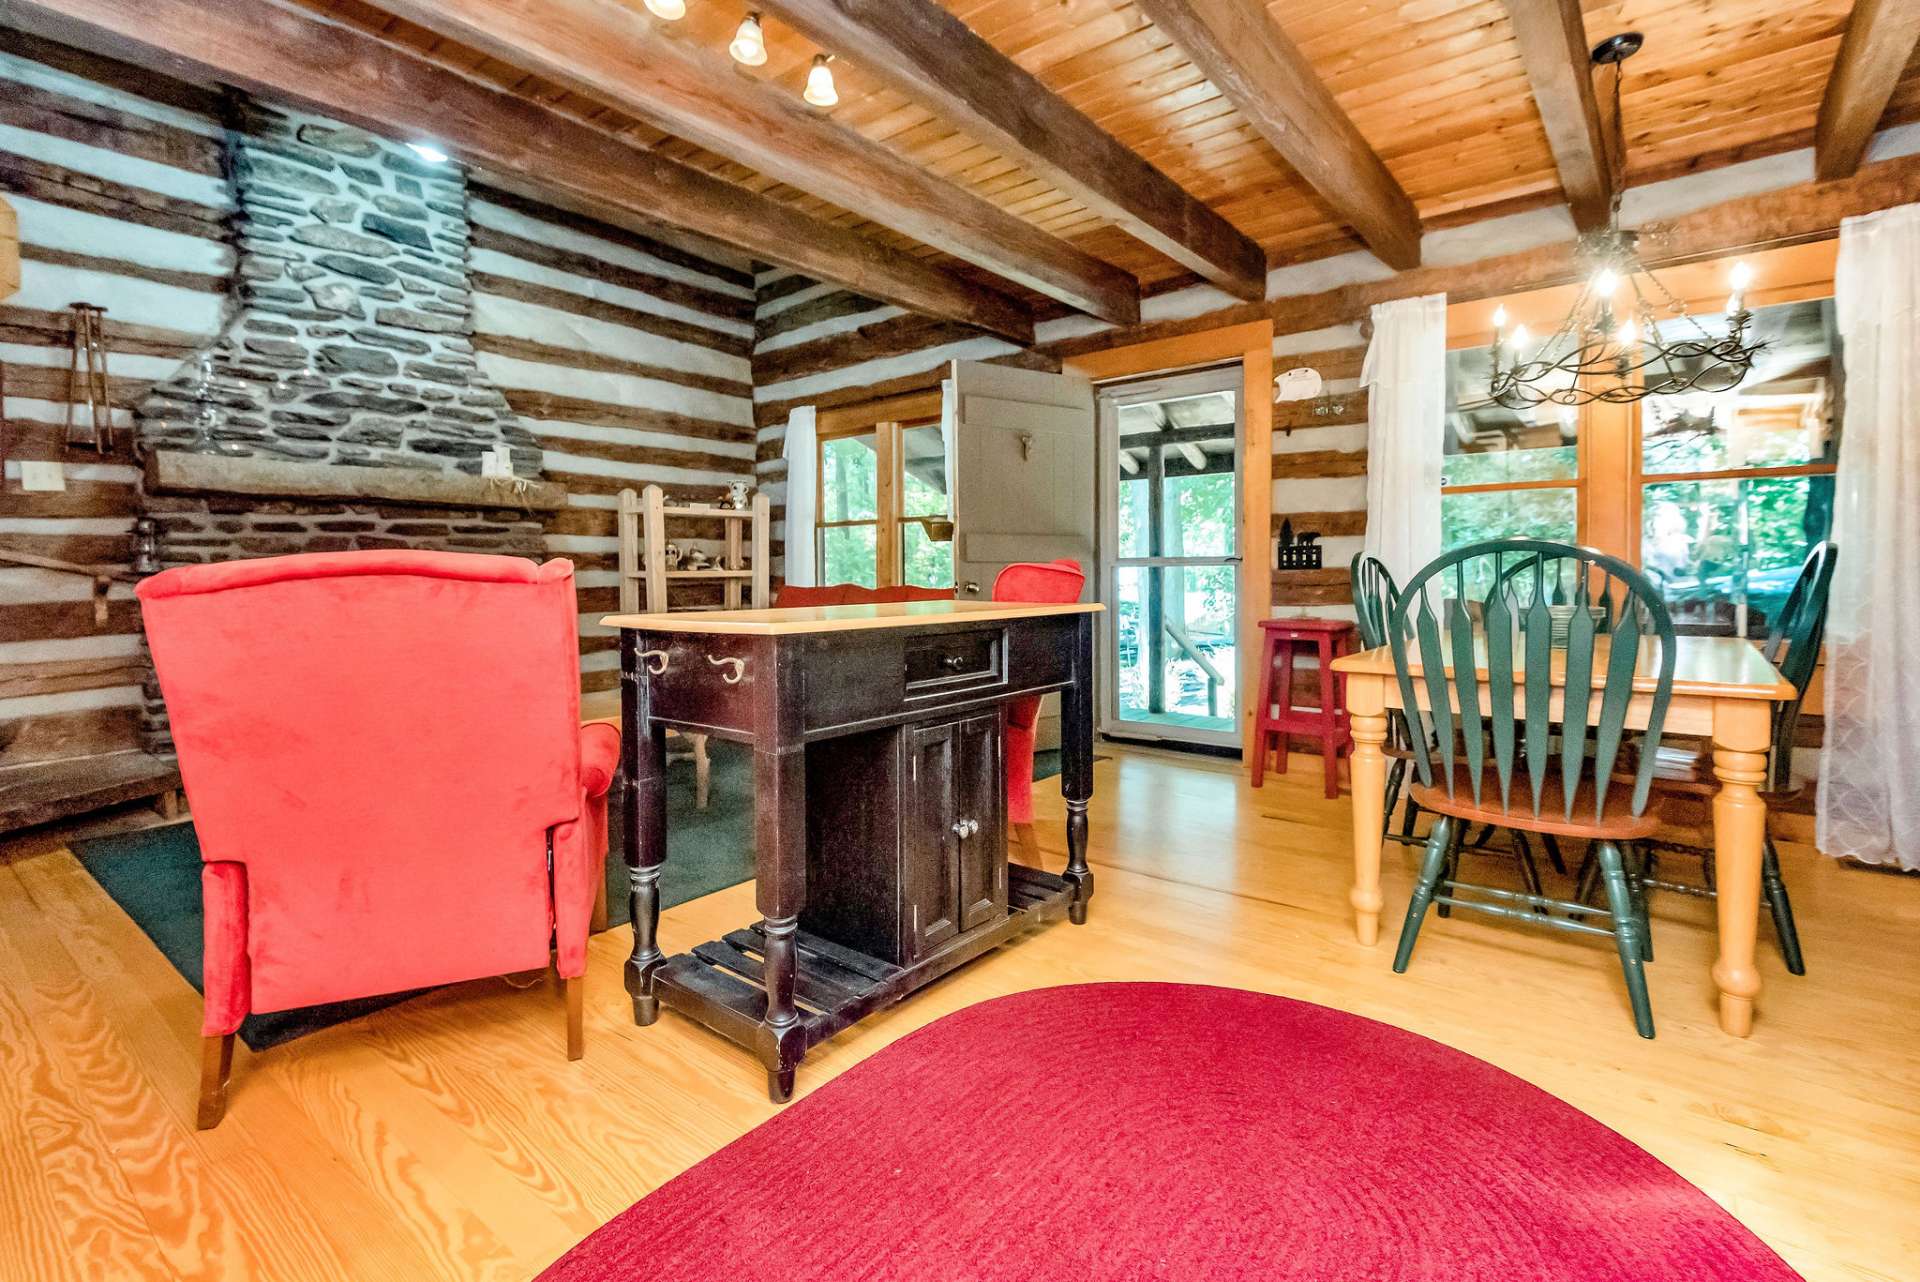 Beautiful wood flooring throughout the cabin. The laundry area is hidden behind double doors just off the primary bedroom.